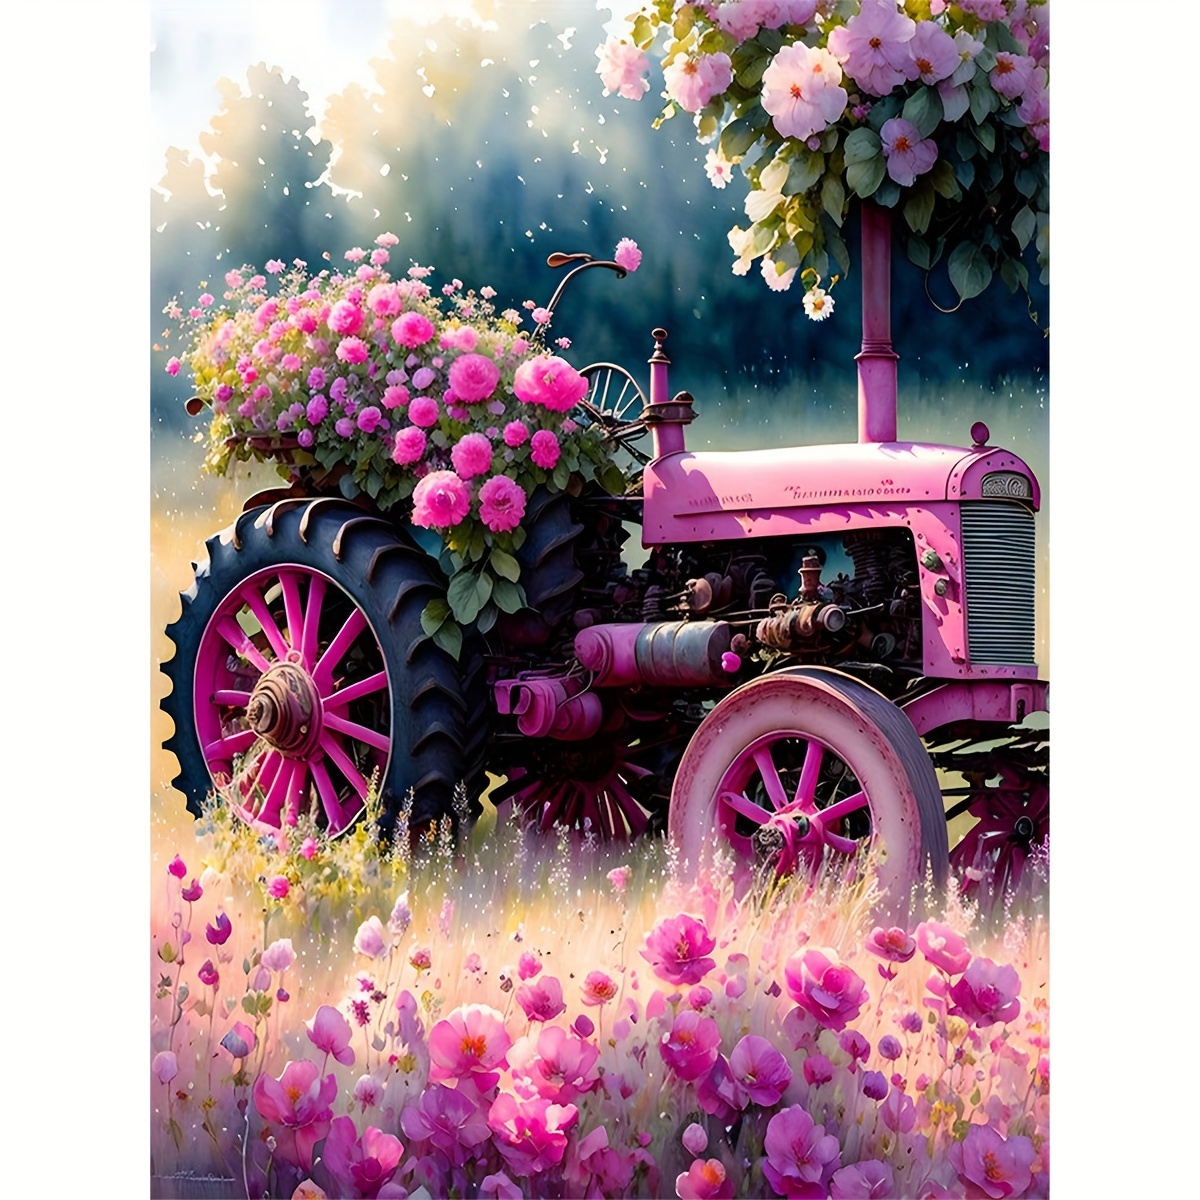 

Diy 5d Diamond Painting Kit - Pink Tractor Design, Full Round Rhinestone Mosaic Craft, Perfect For Home & Office Wall Decor, Ideal Gift For Friends, Frameless (11.8x15.7 Inches)